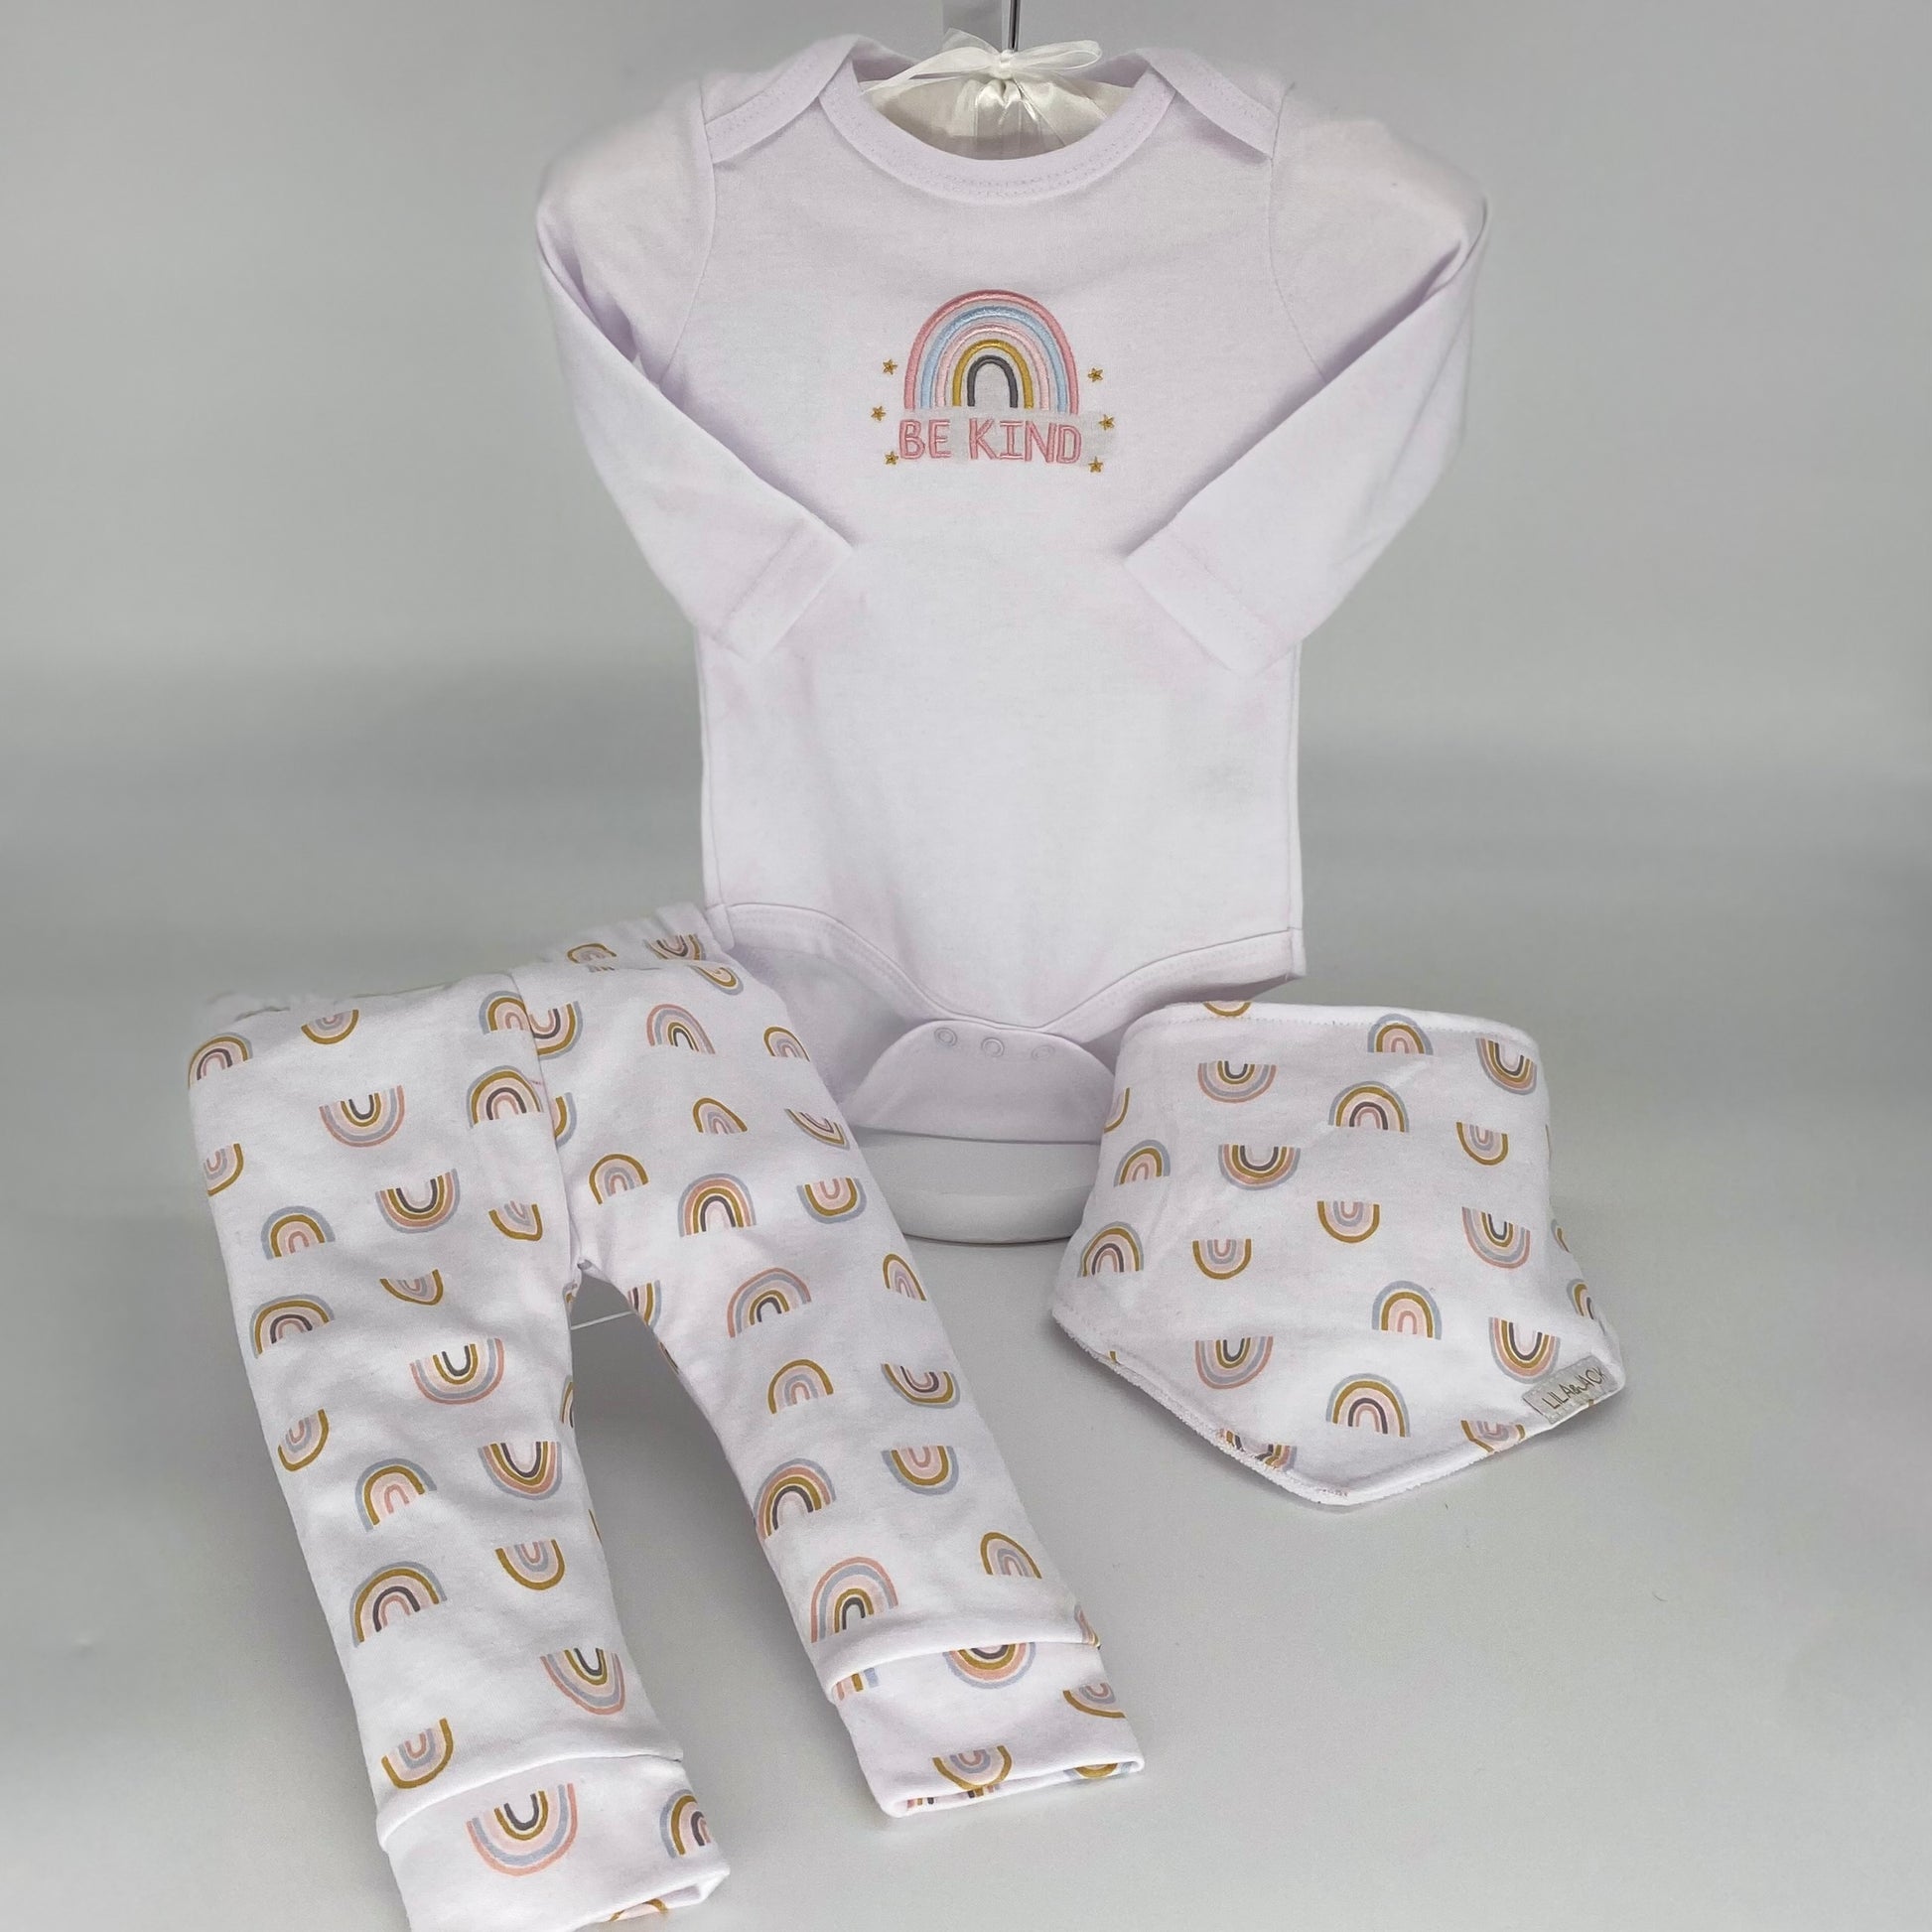 Be Kind Rainbow Collection - sweet 3 piece collection which includes a Be Kind long sleeve onesie, a pair of rainbow pants and coordinating bandana style bib